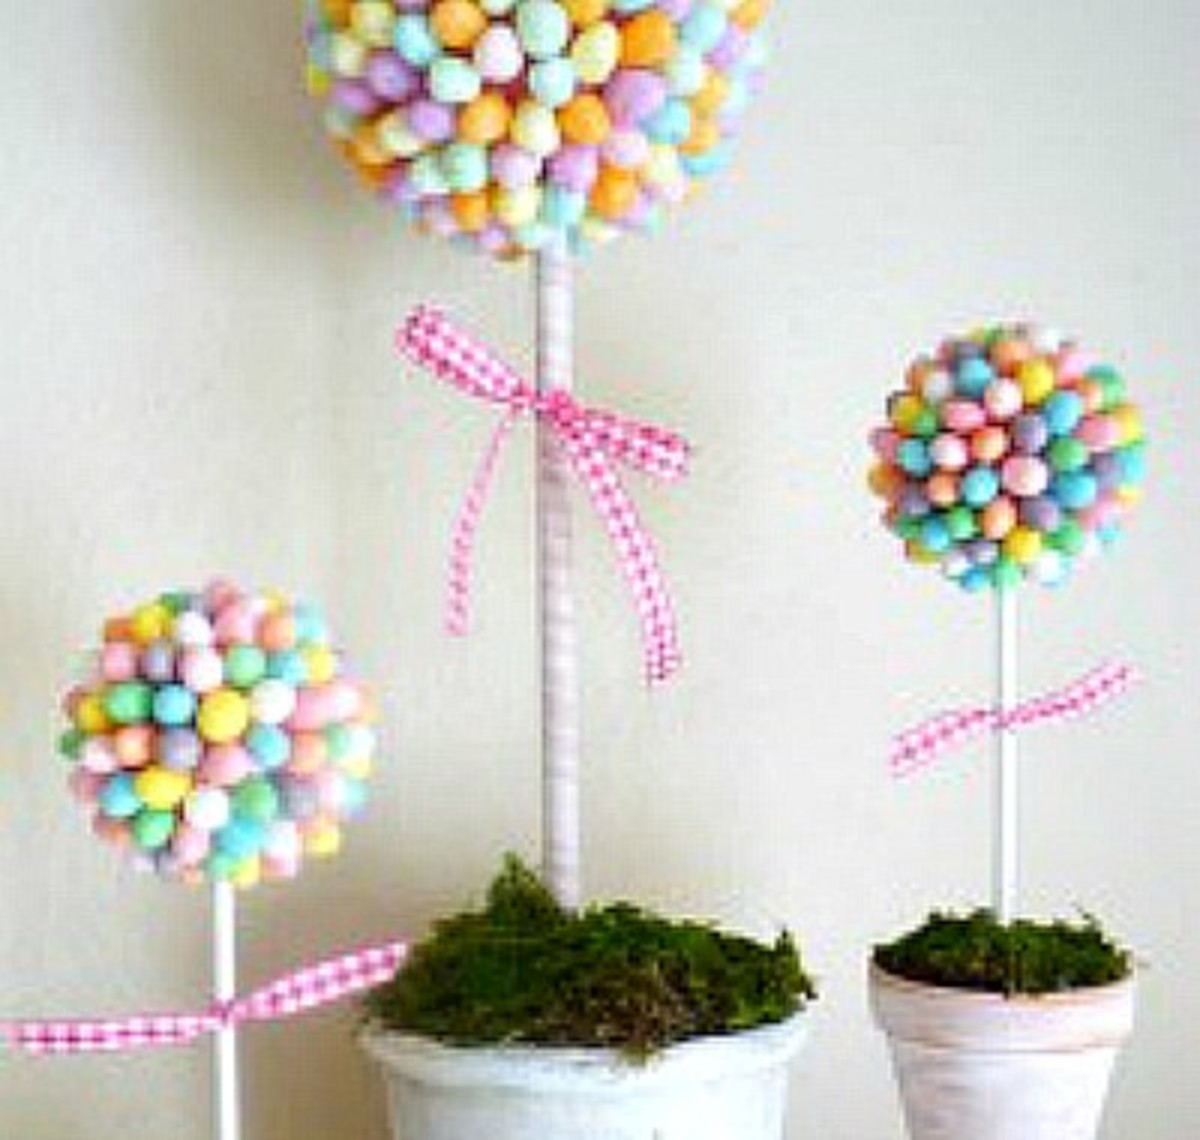 how-to-make-easter-crafts